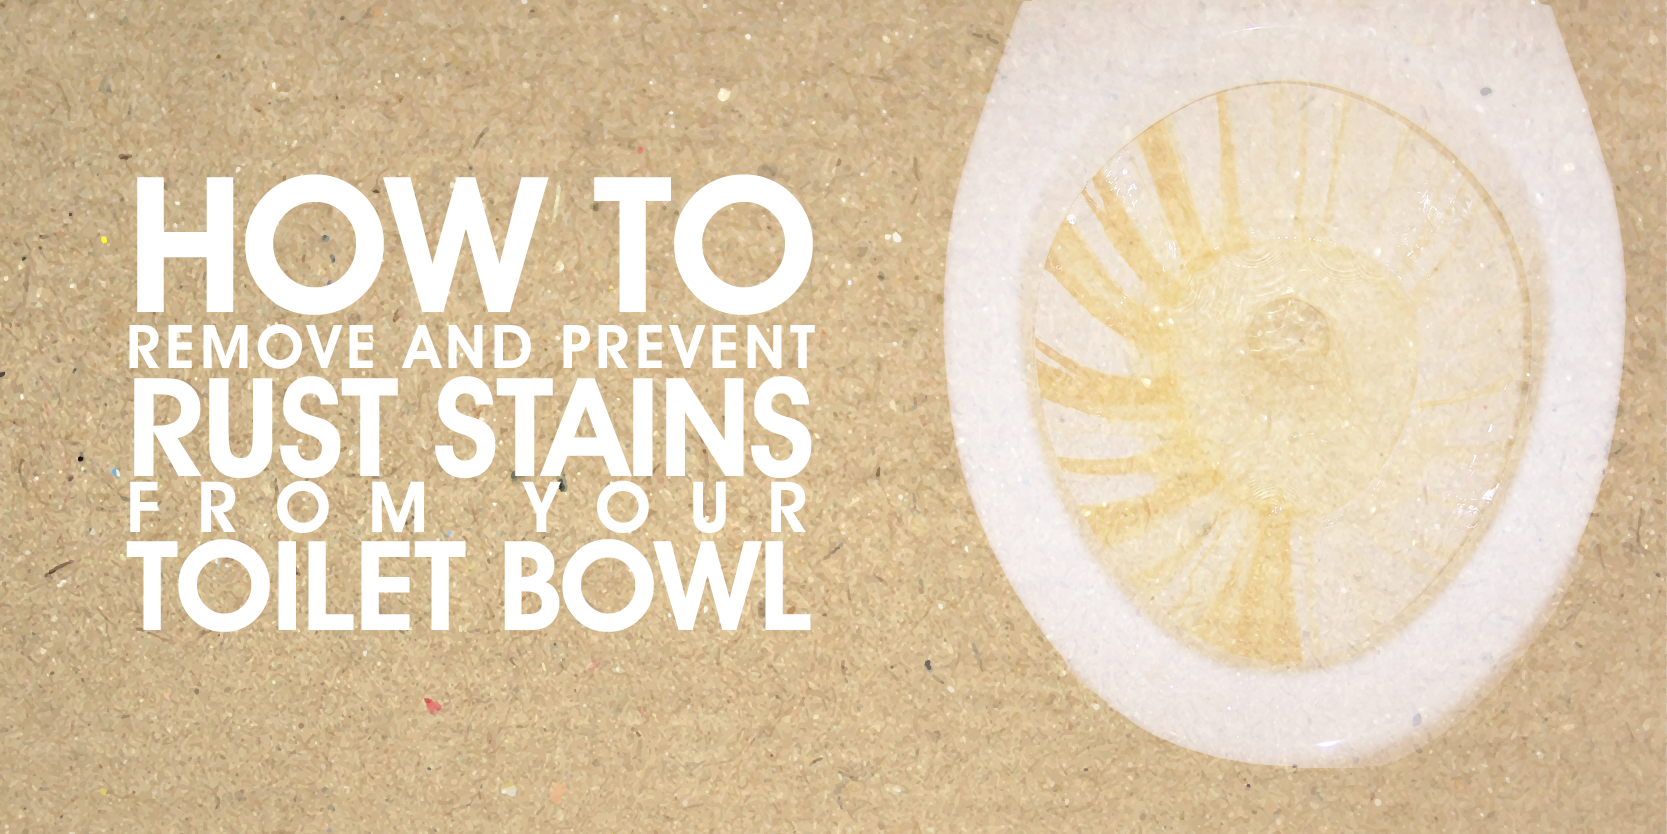 How To Remove and Prevent Rust Stains